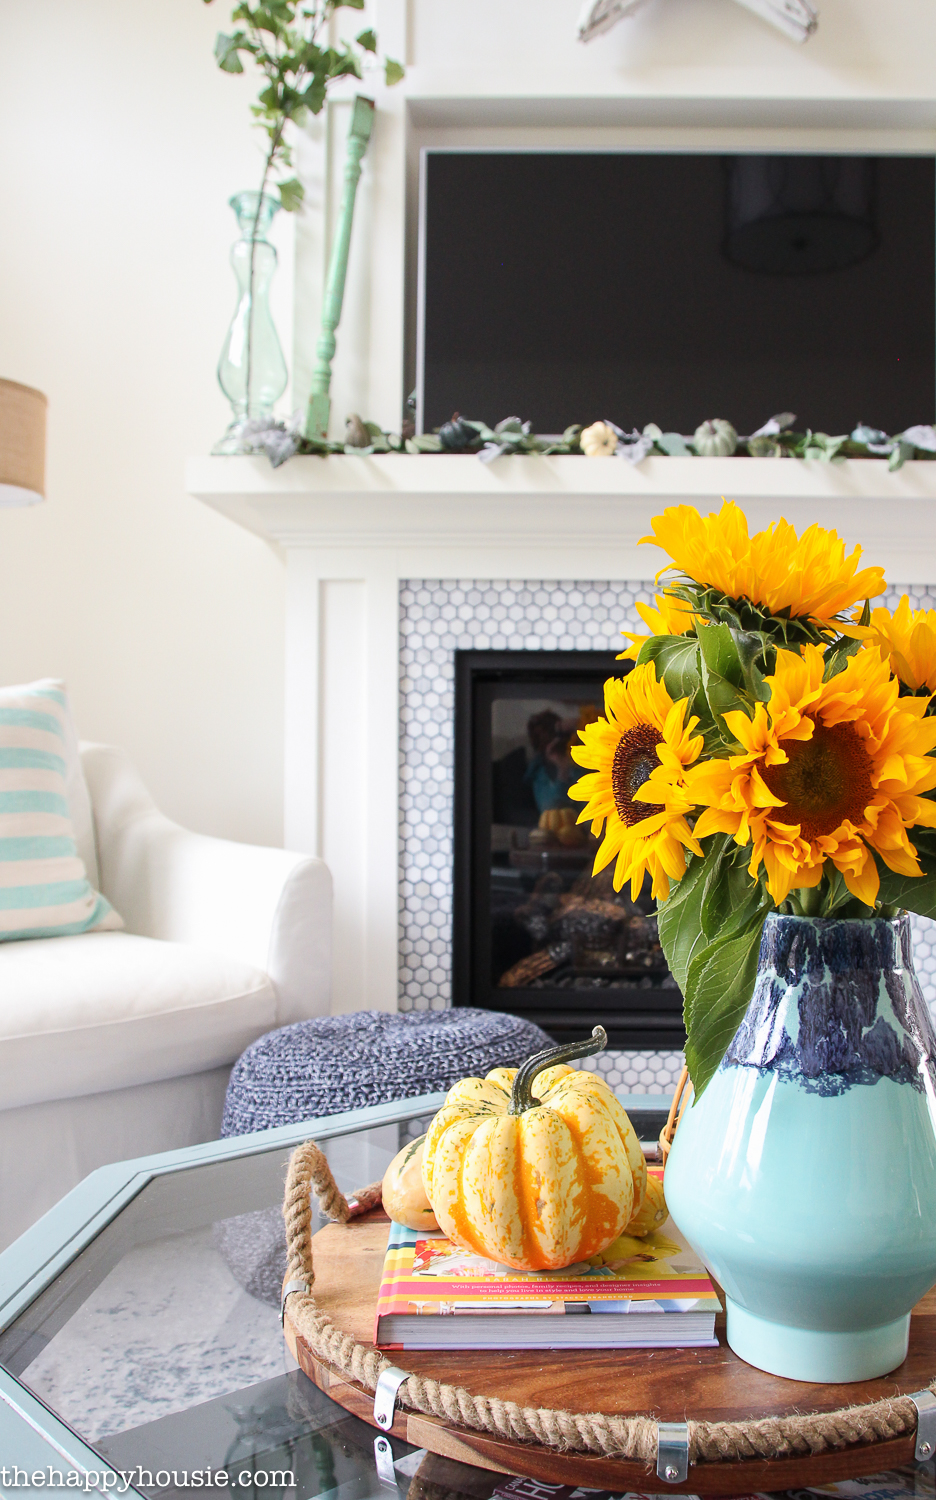 Bright sunflowers in a vase that is blue on the coffee table.